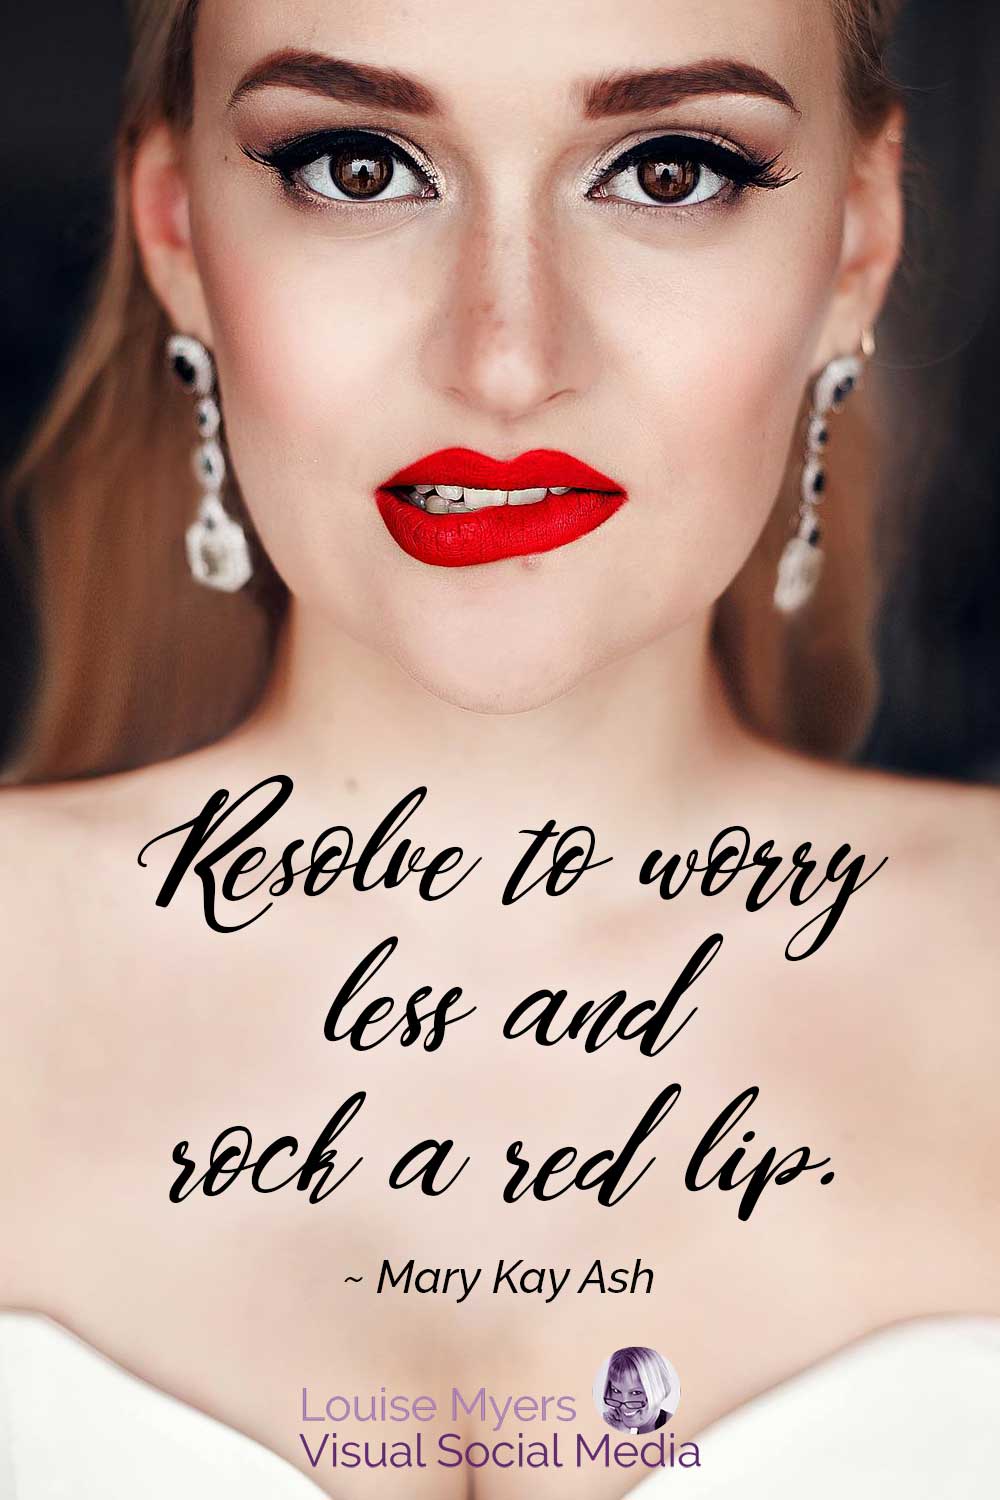 woman biting lip has quote, Resolve to worry less and rock a red lip.